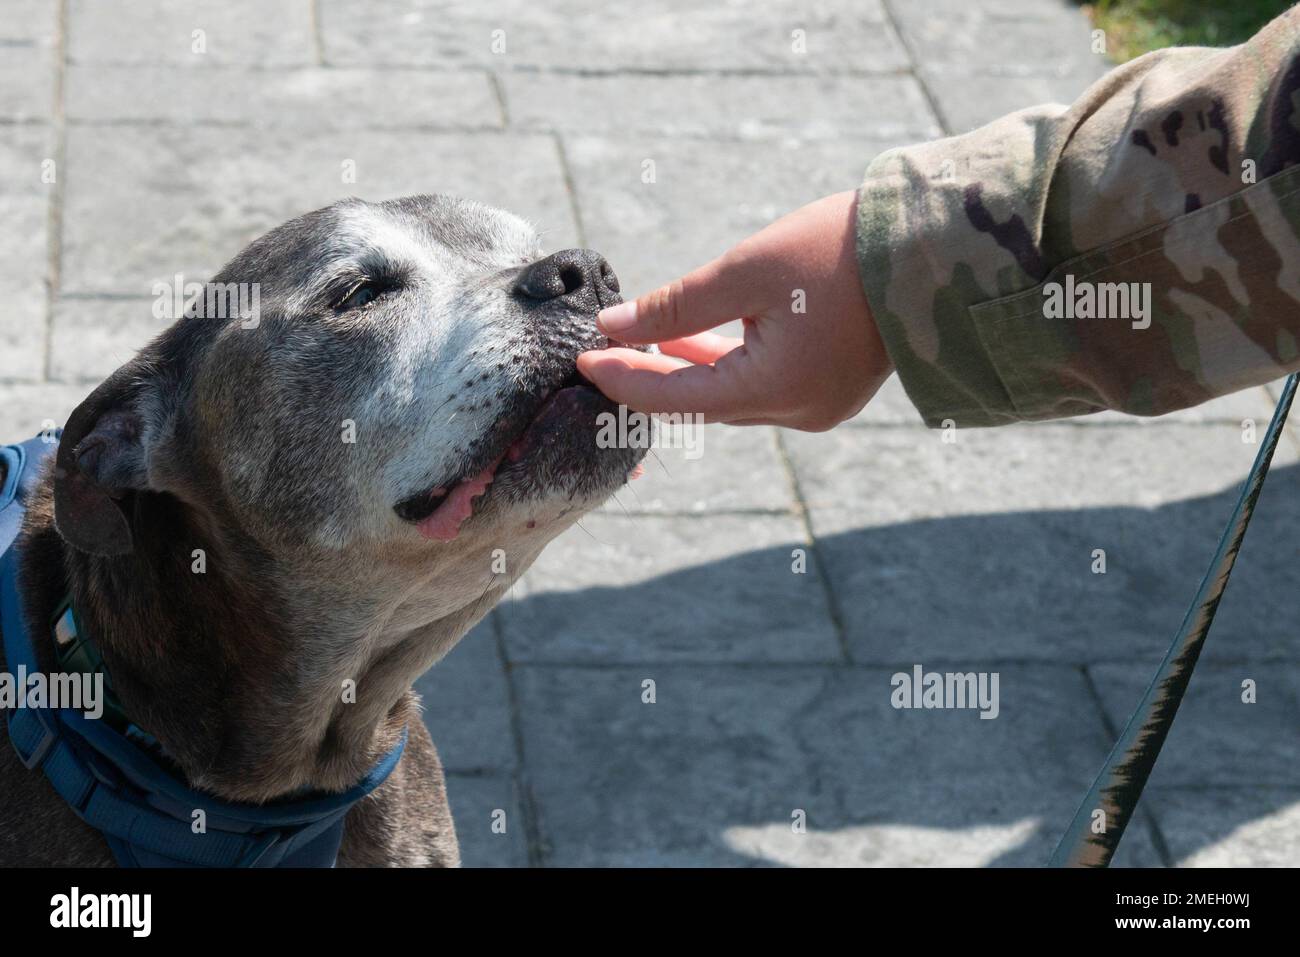 Local upstate New York celebrity, Lloyd the dog, greets an Airman early in his visit to the Niagara Falls Air Reserve Station, New York on Wednesday, Aug. 17, 2022. The 107th Attack Wing, Air National Guard, invited Lloyd to enjoy the day with Airmen as he battles the late stages of kidney failure. Stock Photo